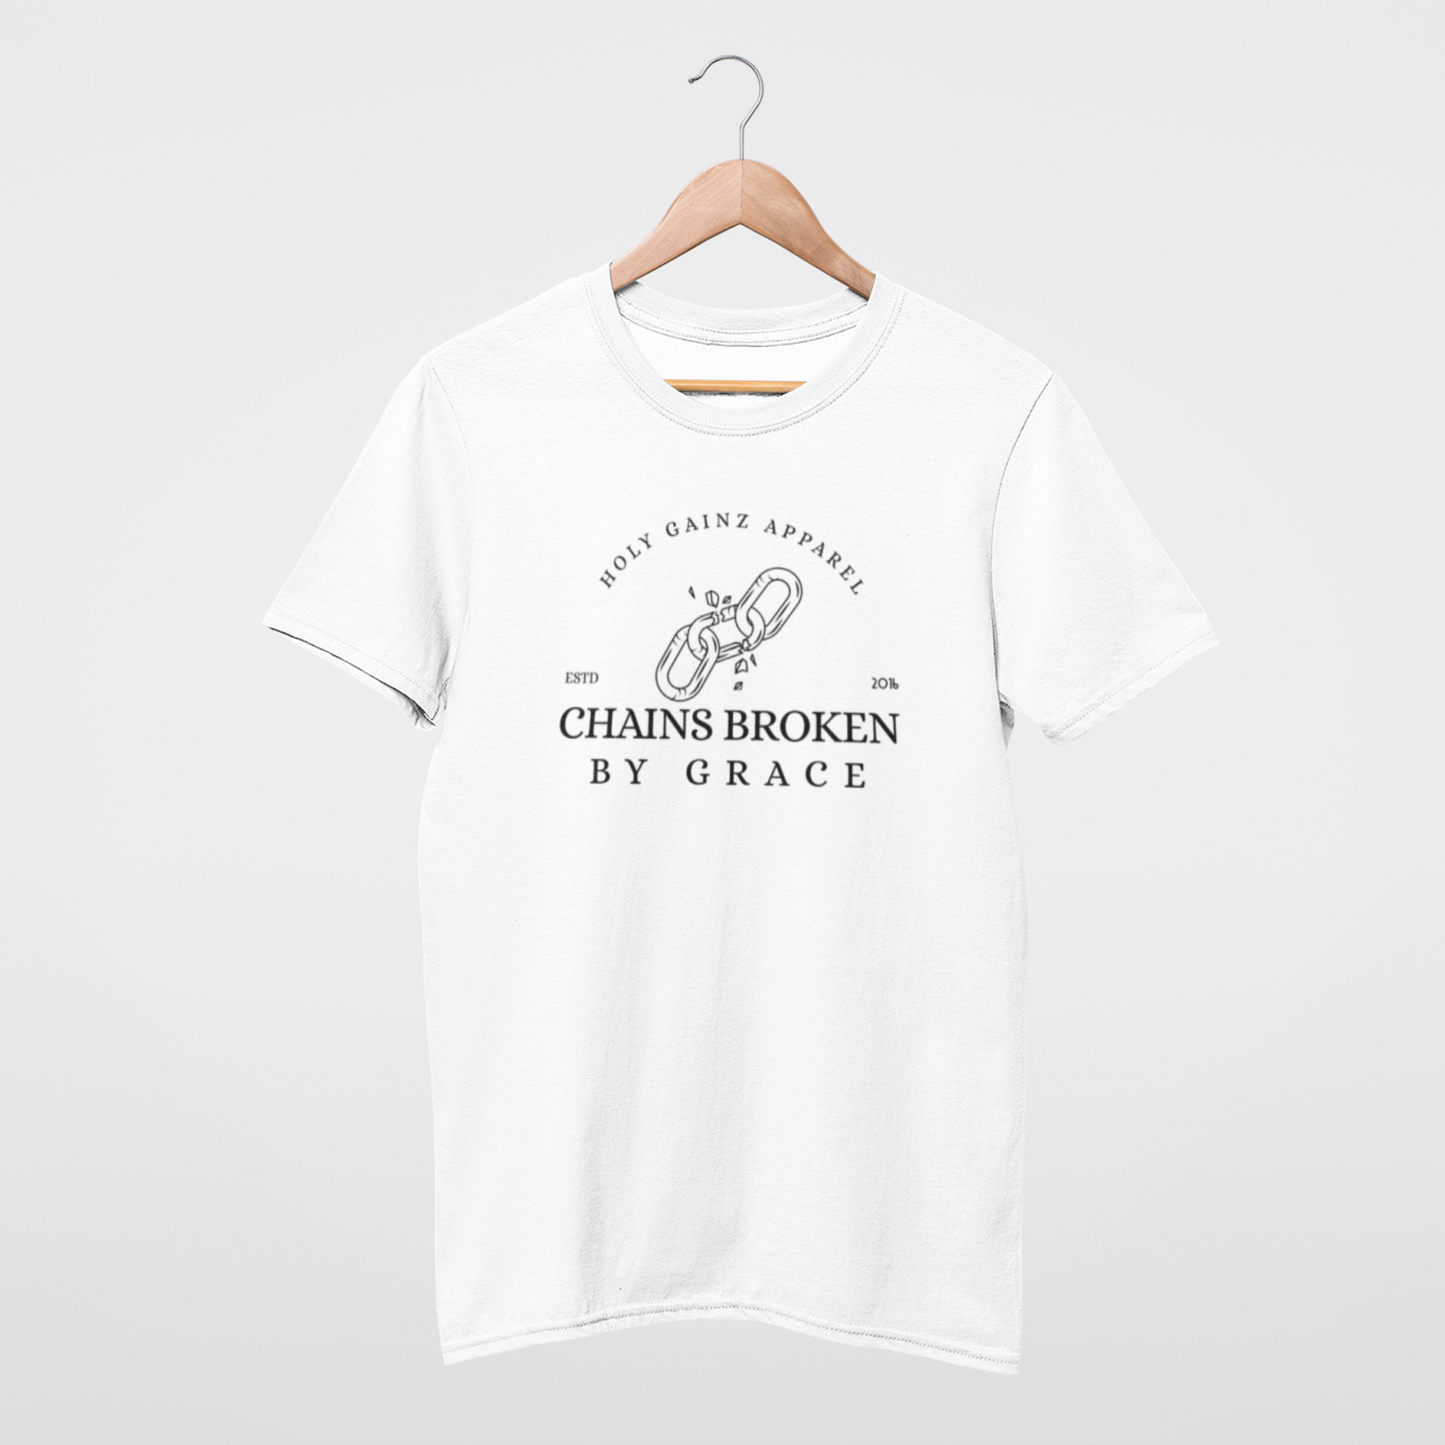 (LAST CHANCE) Holy Gainz Apparel Chains Broken By Grace Unisex Tee